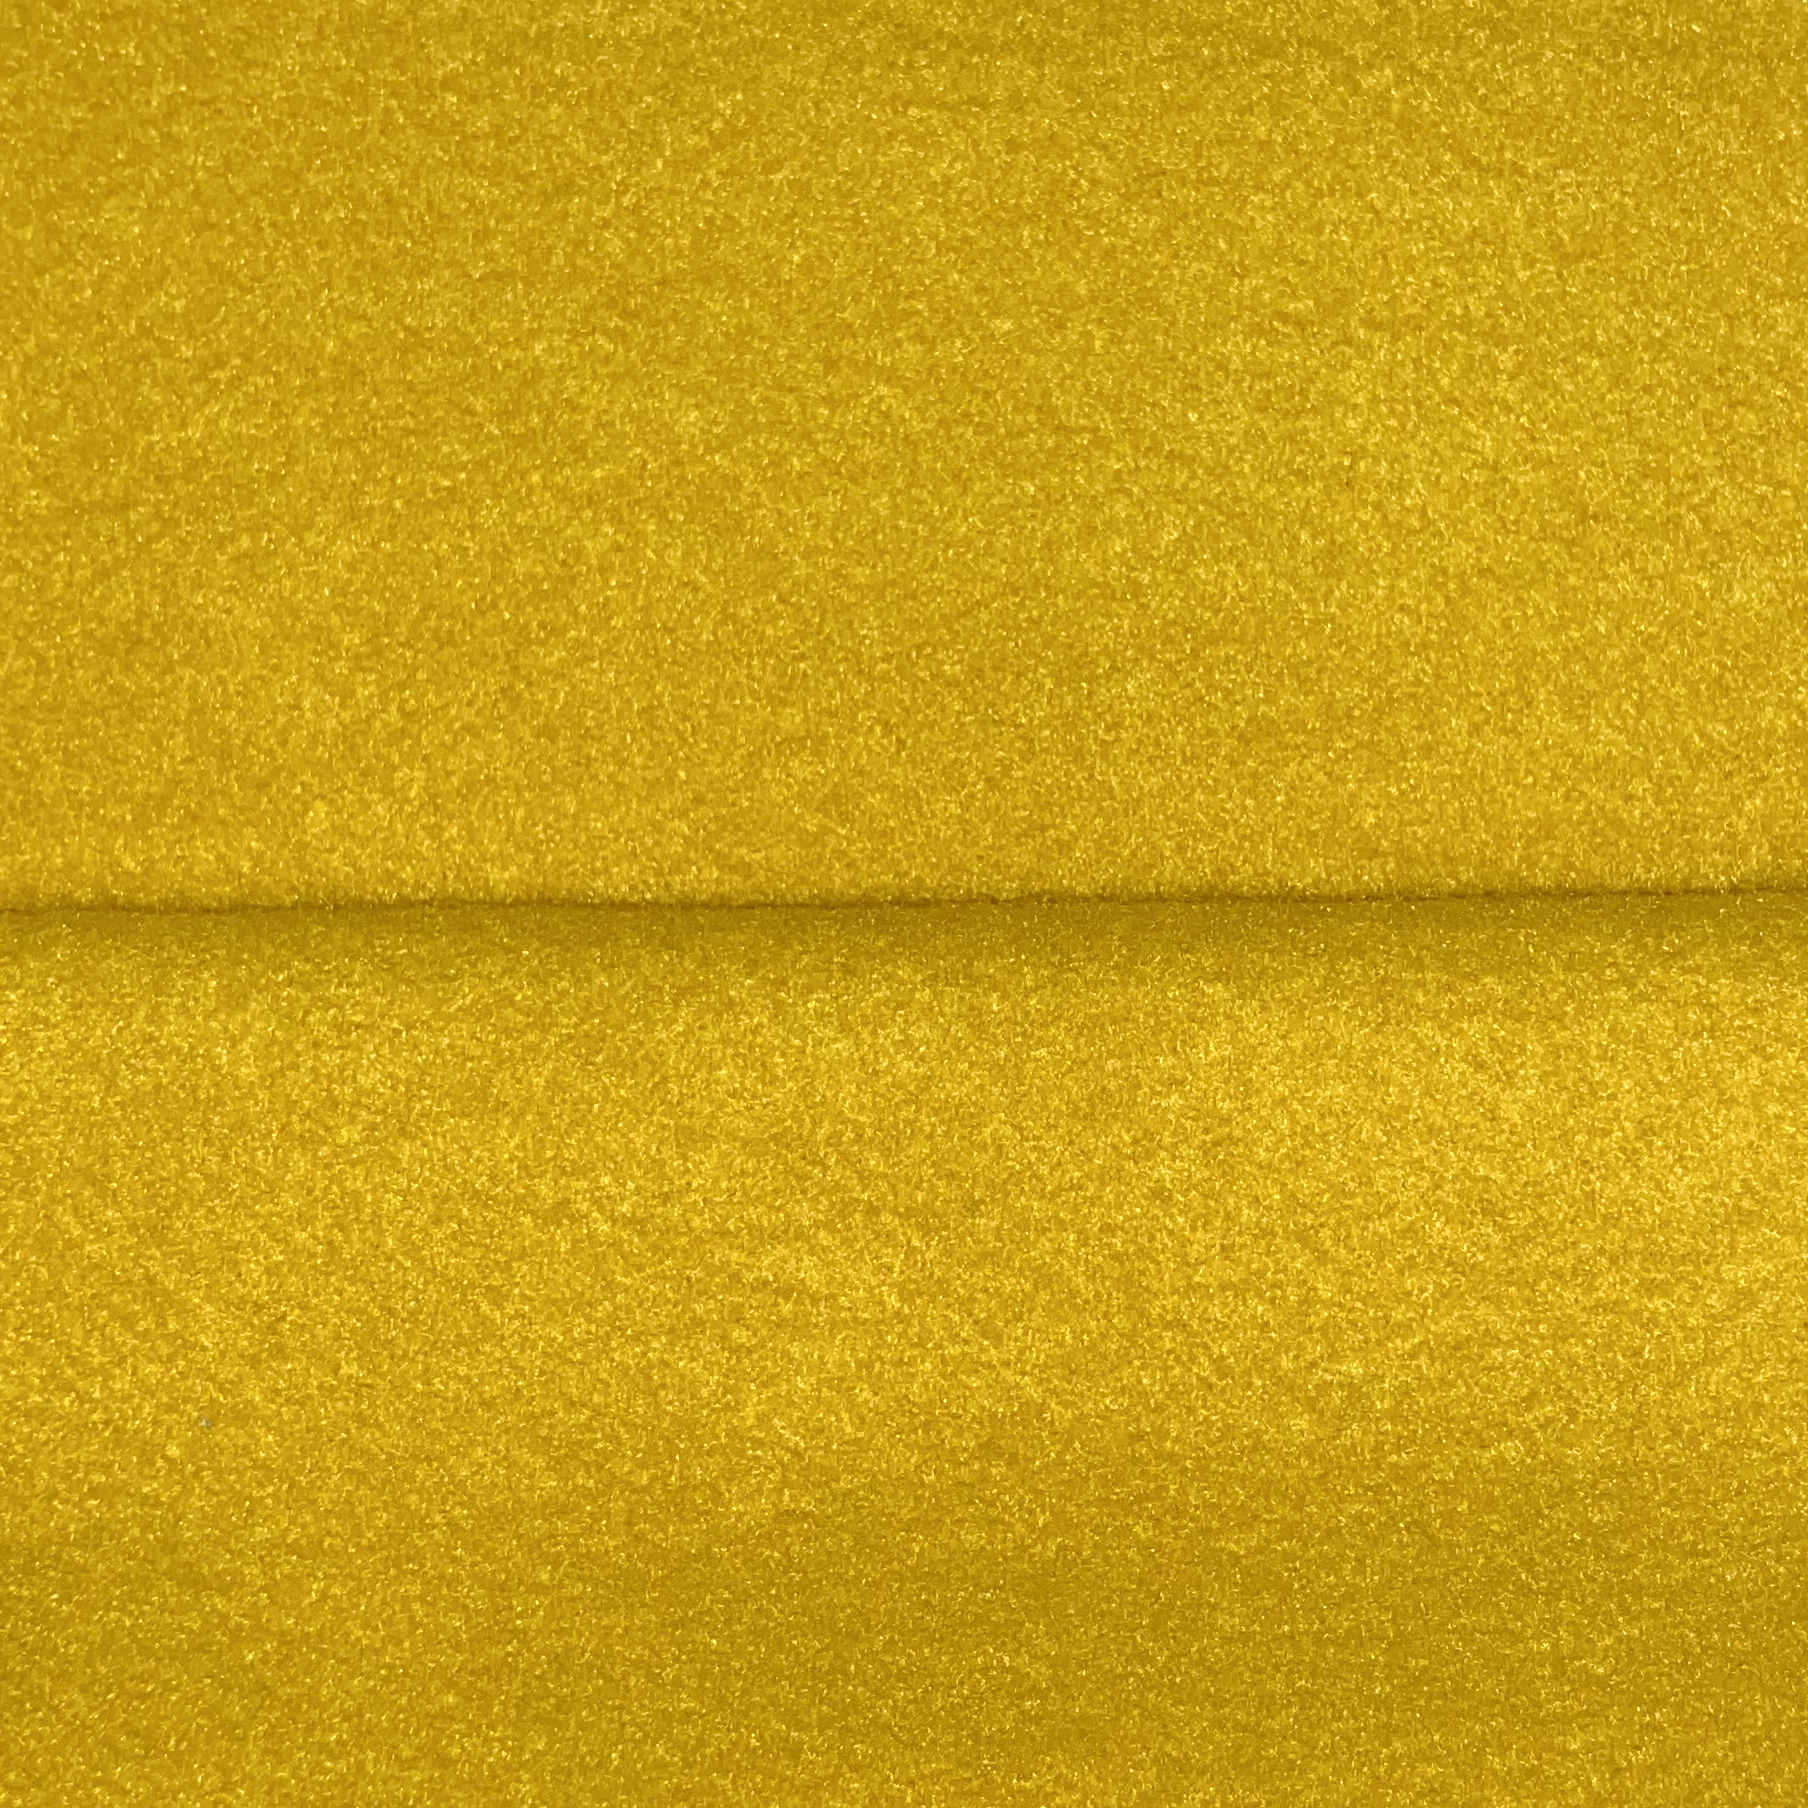 YELLOW WORSTED FABRIC